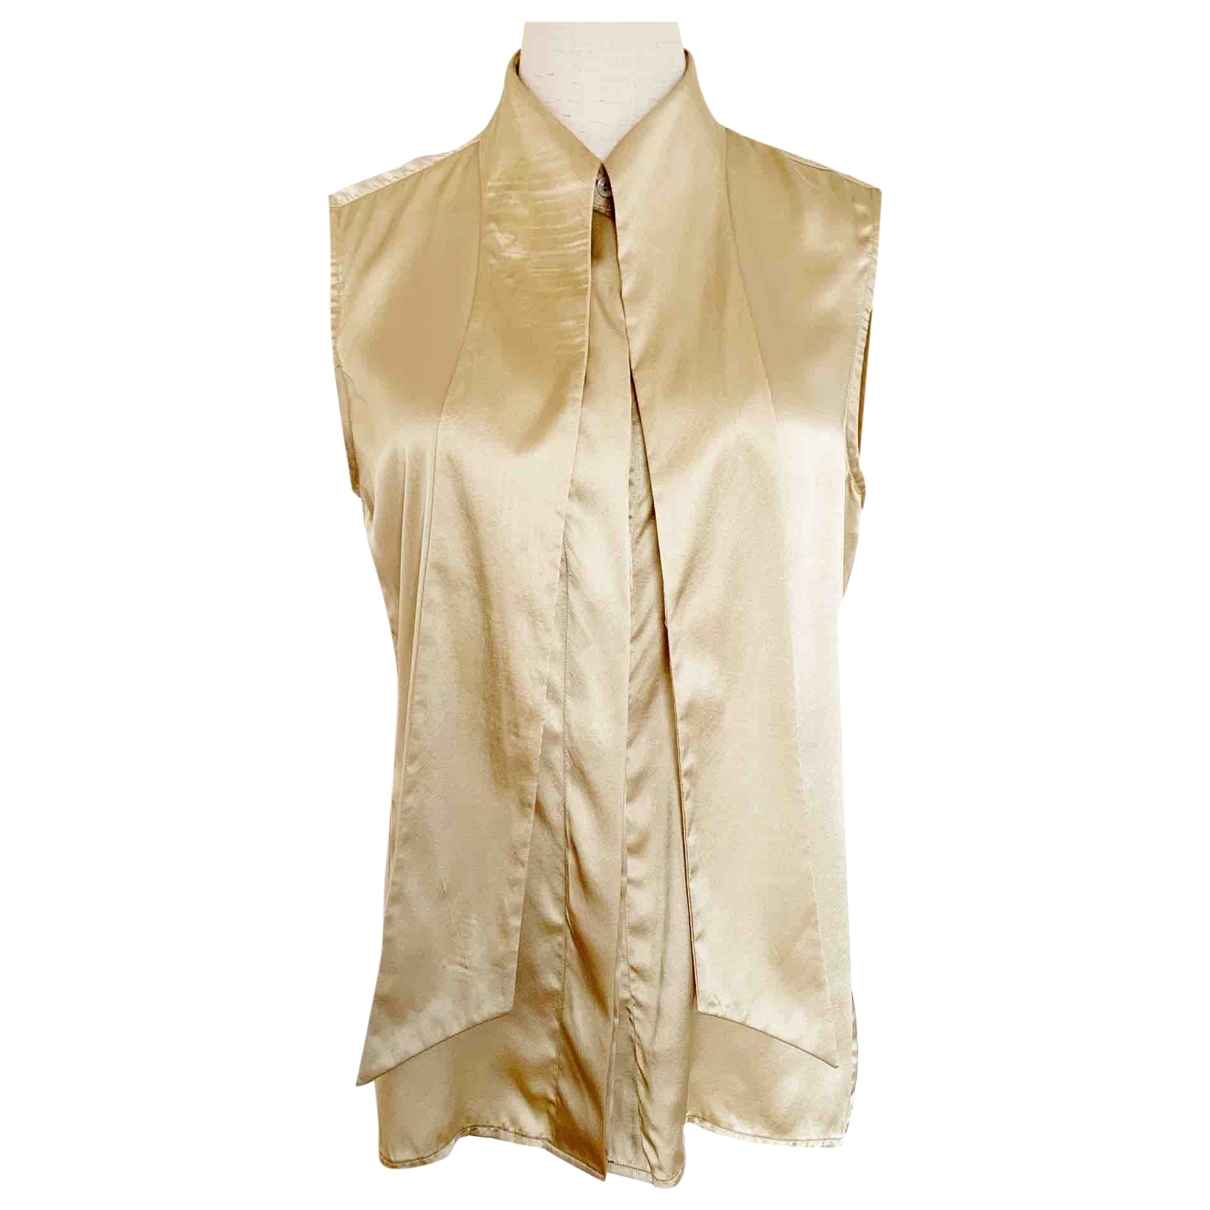 Silk blouse Ranking integrated Now free shipping 1st place